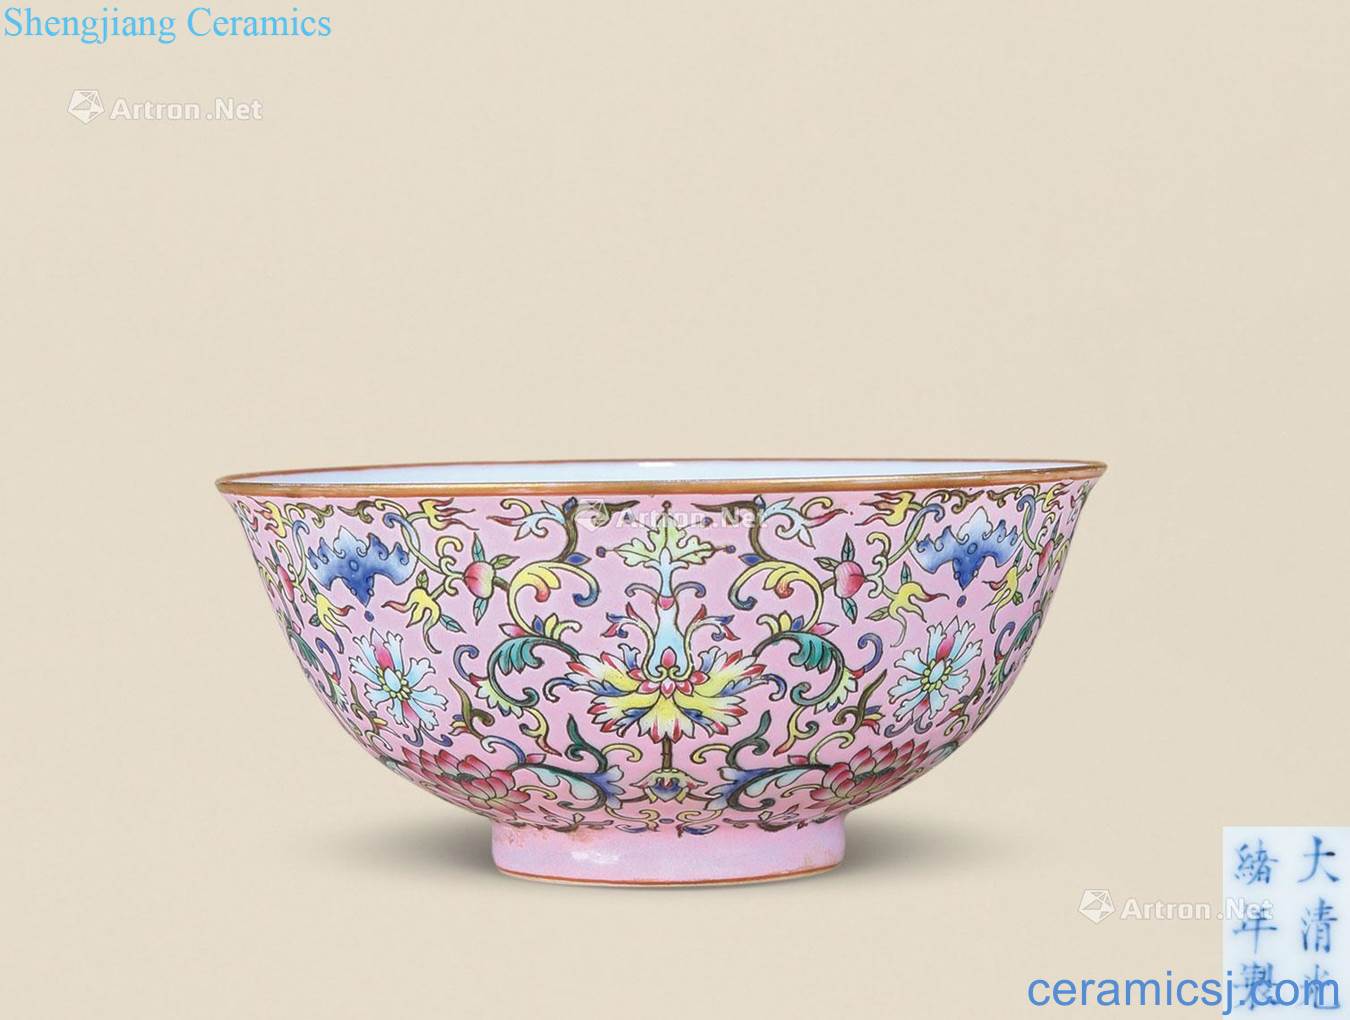 Pastel reign of qing emperor guangxu passionflower green-splashed bowls